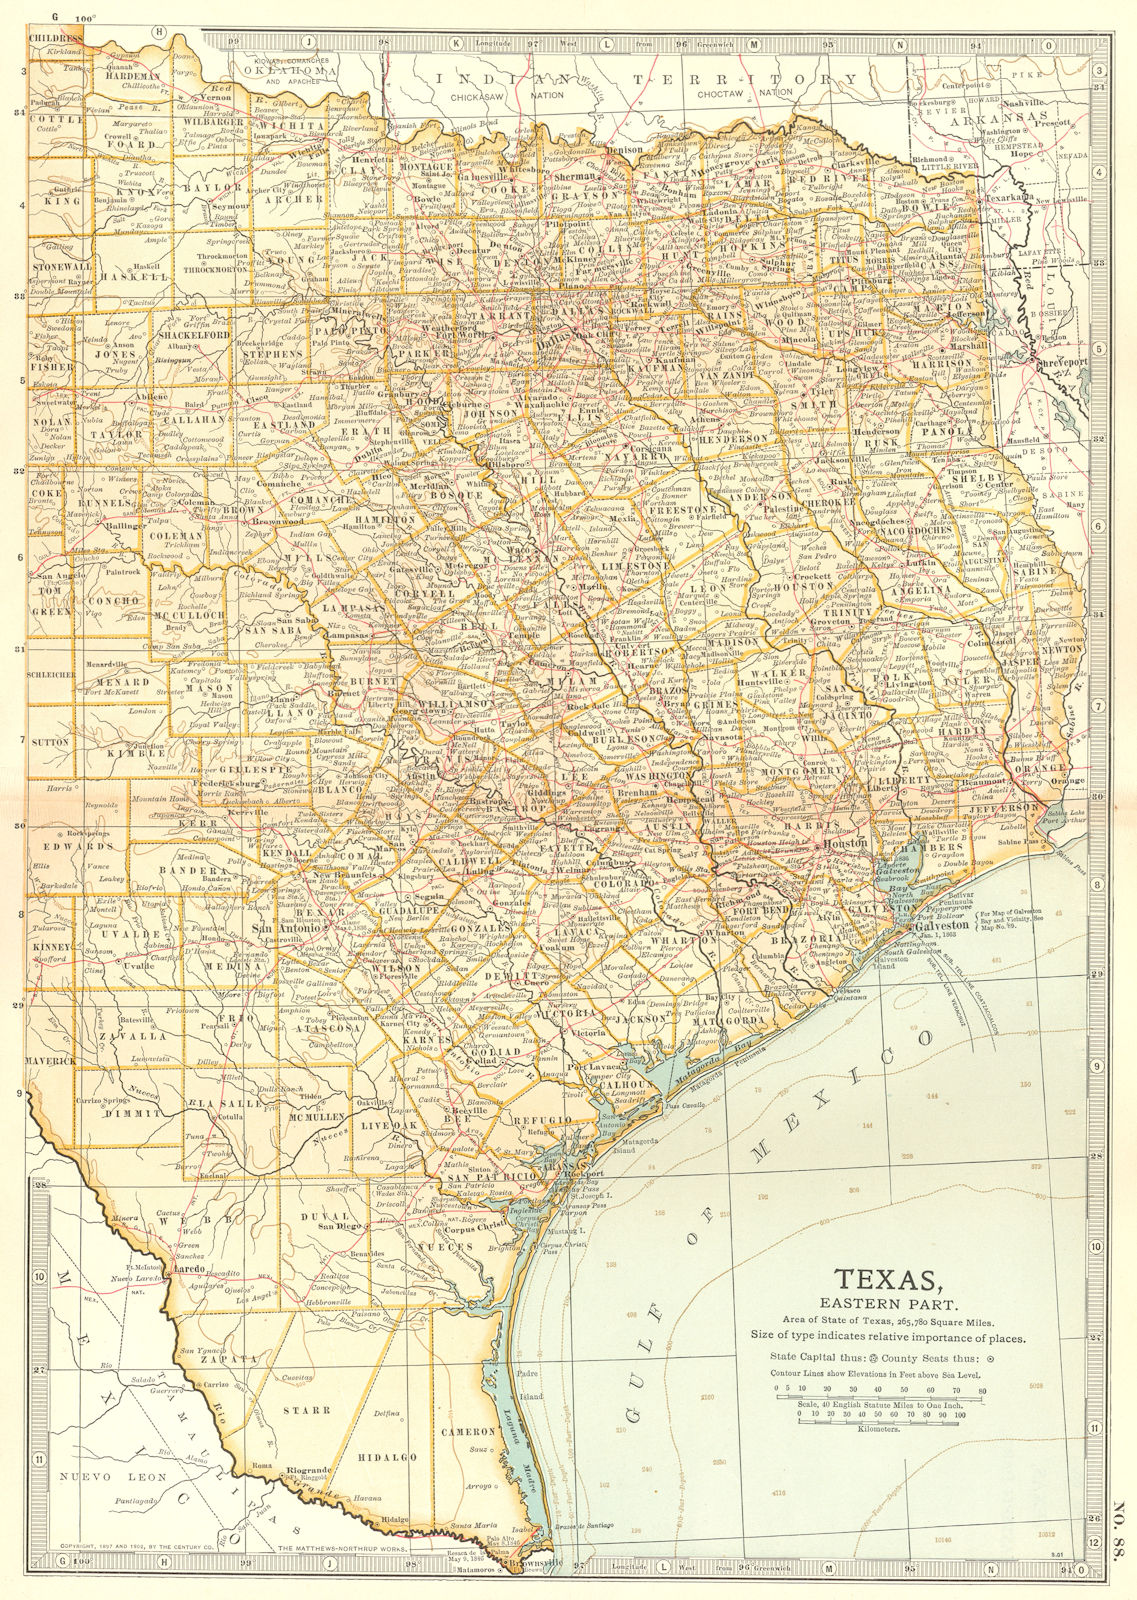 TEXAS EAST. State map. Shows Texas revolution battlefields/dates 1835-6 1903